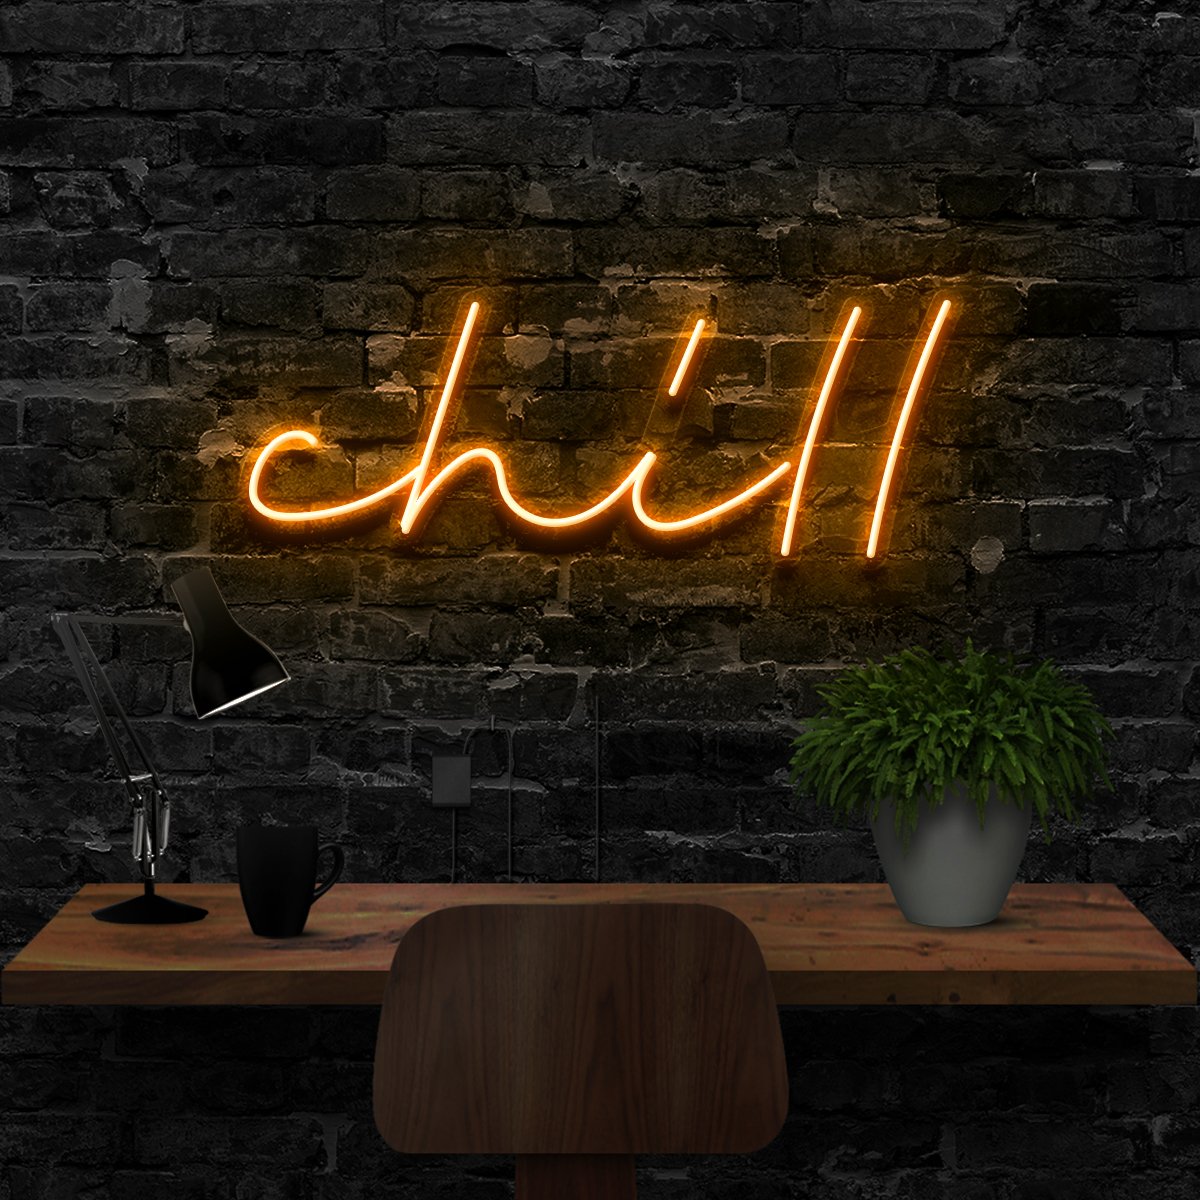 "Chill" Neon Sign